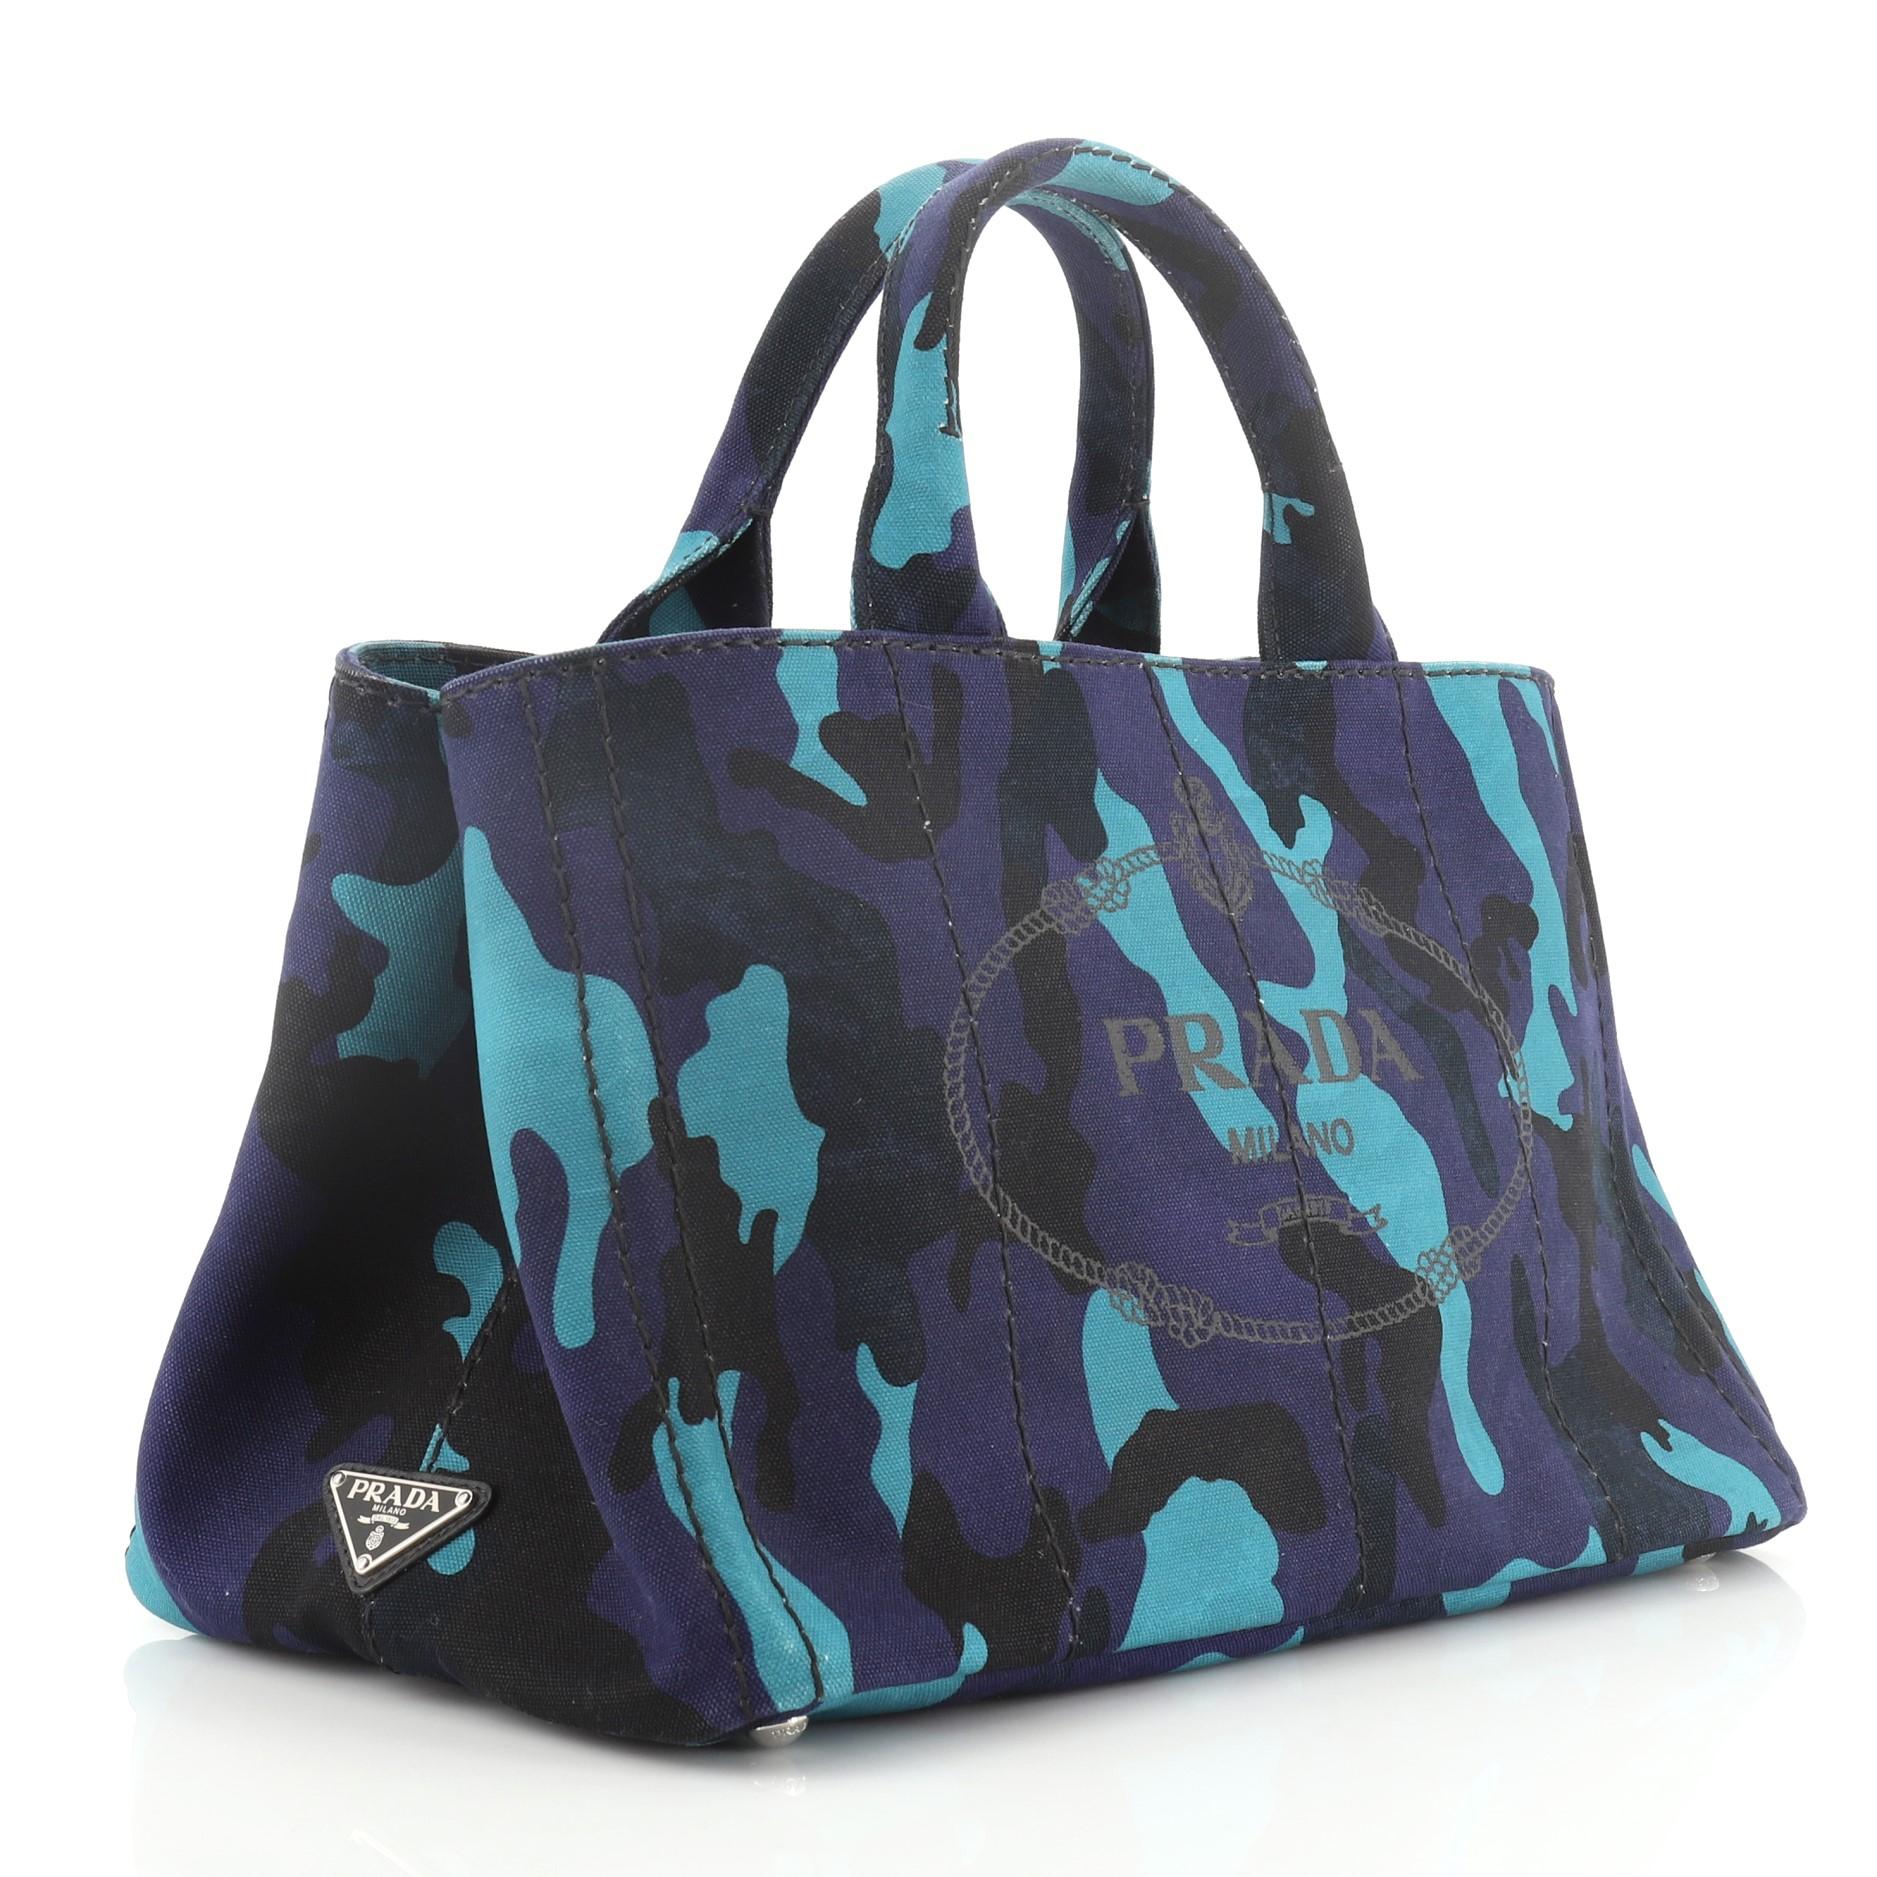 This Prada Canapa Convertible Tote Printed Canvas Medium, crafted from blue printed canvas, features dual-rolled handles, side snap buttons, and silver-tone hardware. It opens to a black fabric interior with zip and slip pockets. 

Estimated Retail